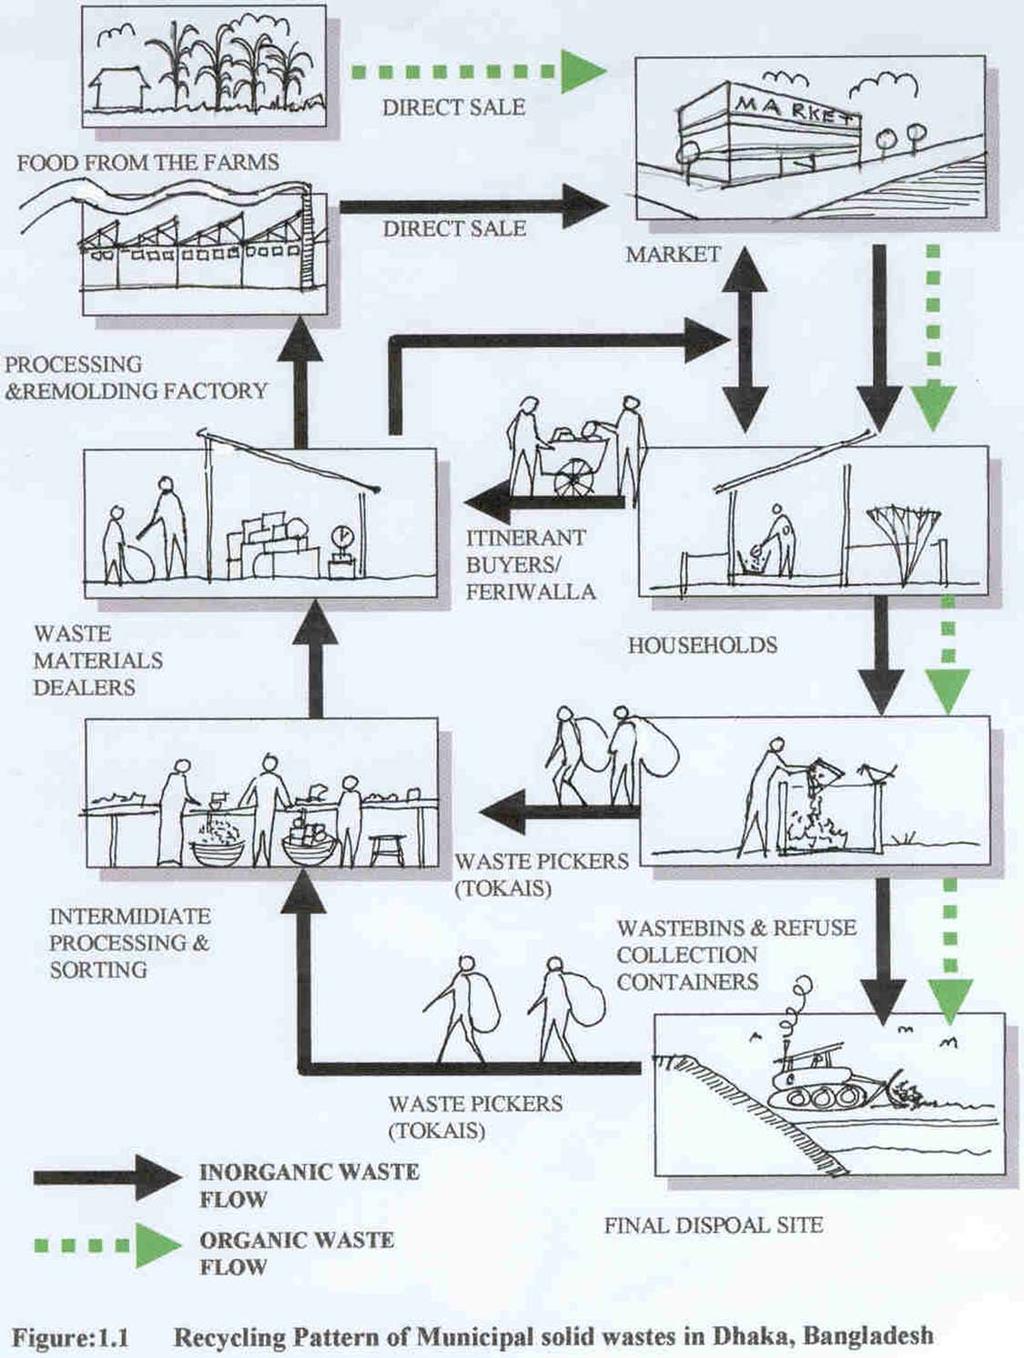 Waste Recycling by Informal Sector PRESENT